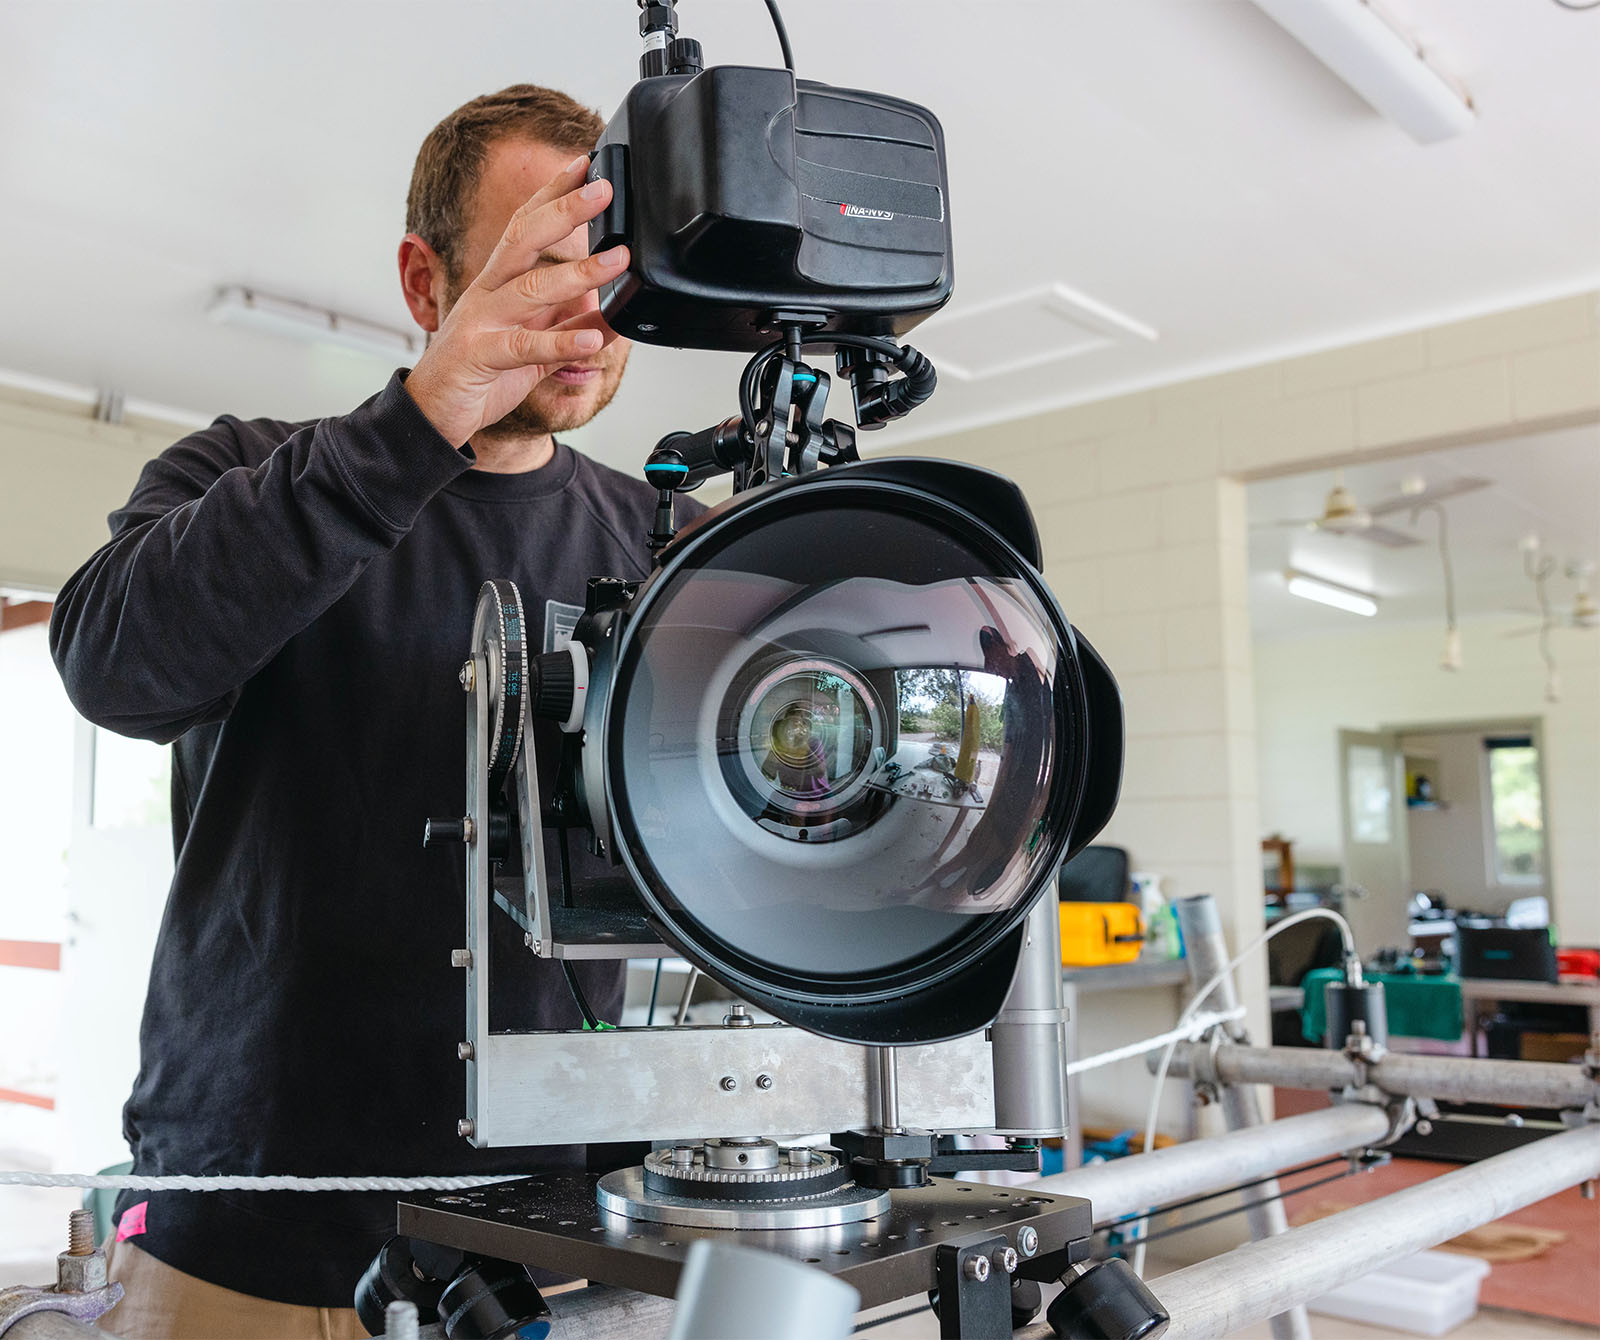 A man adjusts a large lens on a professional camera mounted on a tripod in a well-lit room, focusing with his hand partially covering his face.